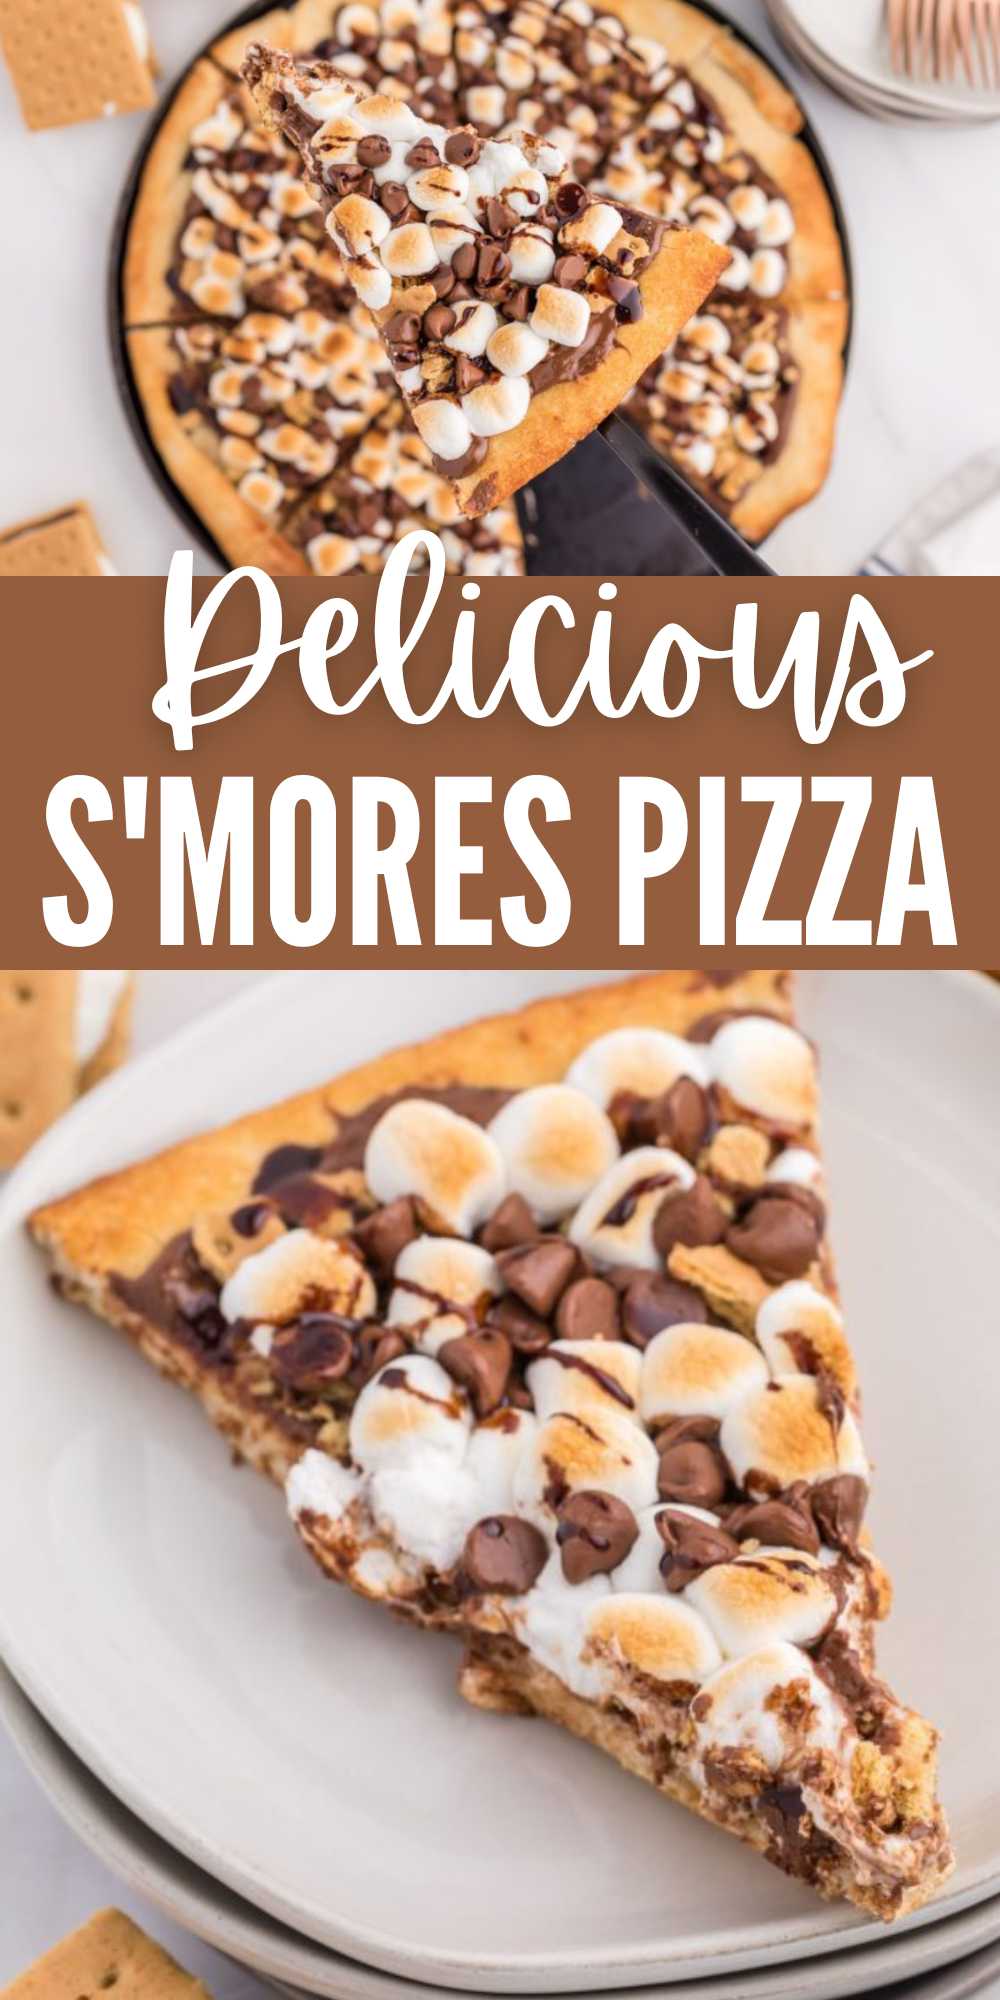 S'mores Pizza is the ultimate dessert pizza. It is loaded with classic smores flavor and all baked on a pizza dough crust. This dessert is perfect for any occasion. I love to make it when the kids have their friends over as they so impressed. Feel free to make this Smores pizza your own with additional toppings. #eatingonadime #smorespizza #smores